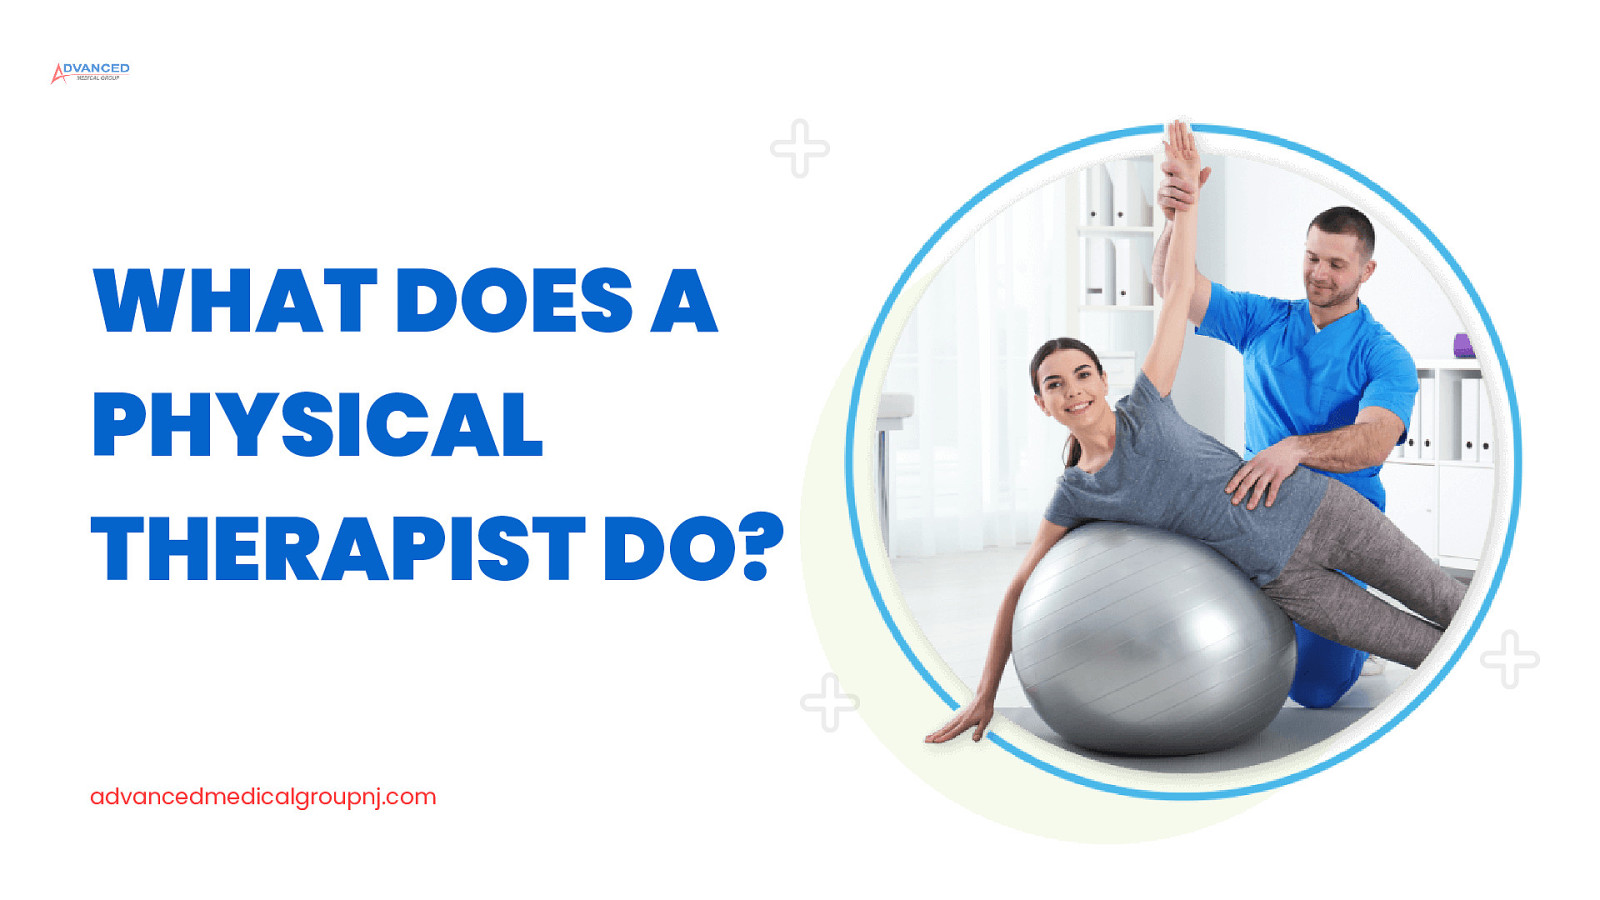 What Does A Physical Therapist Do?